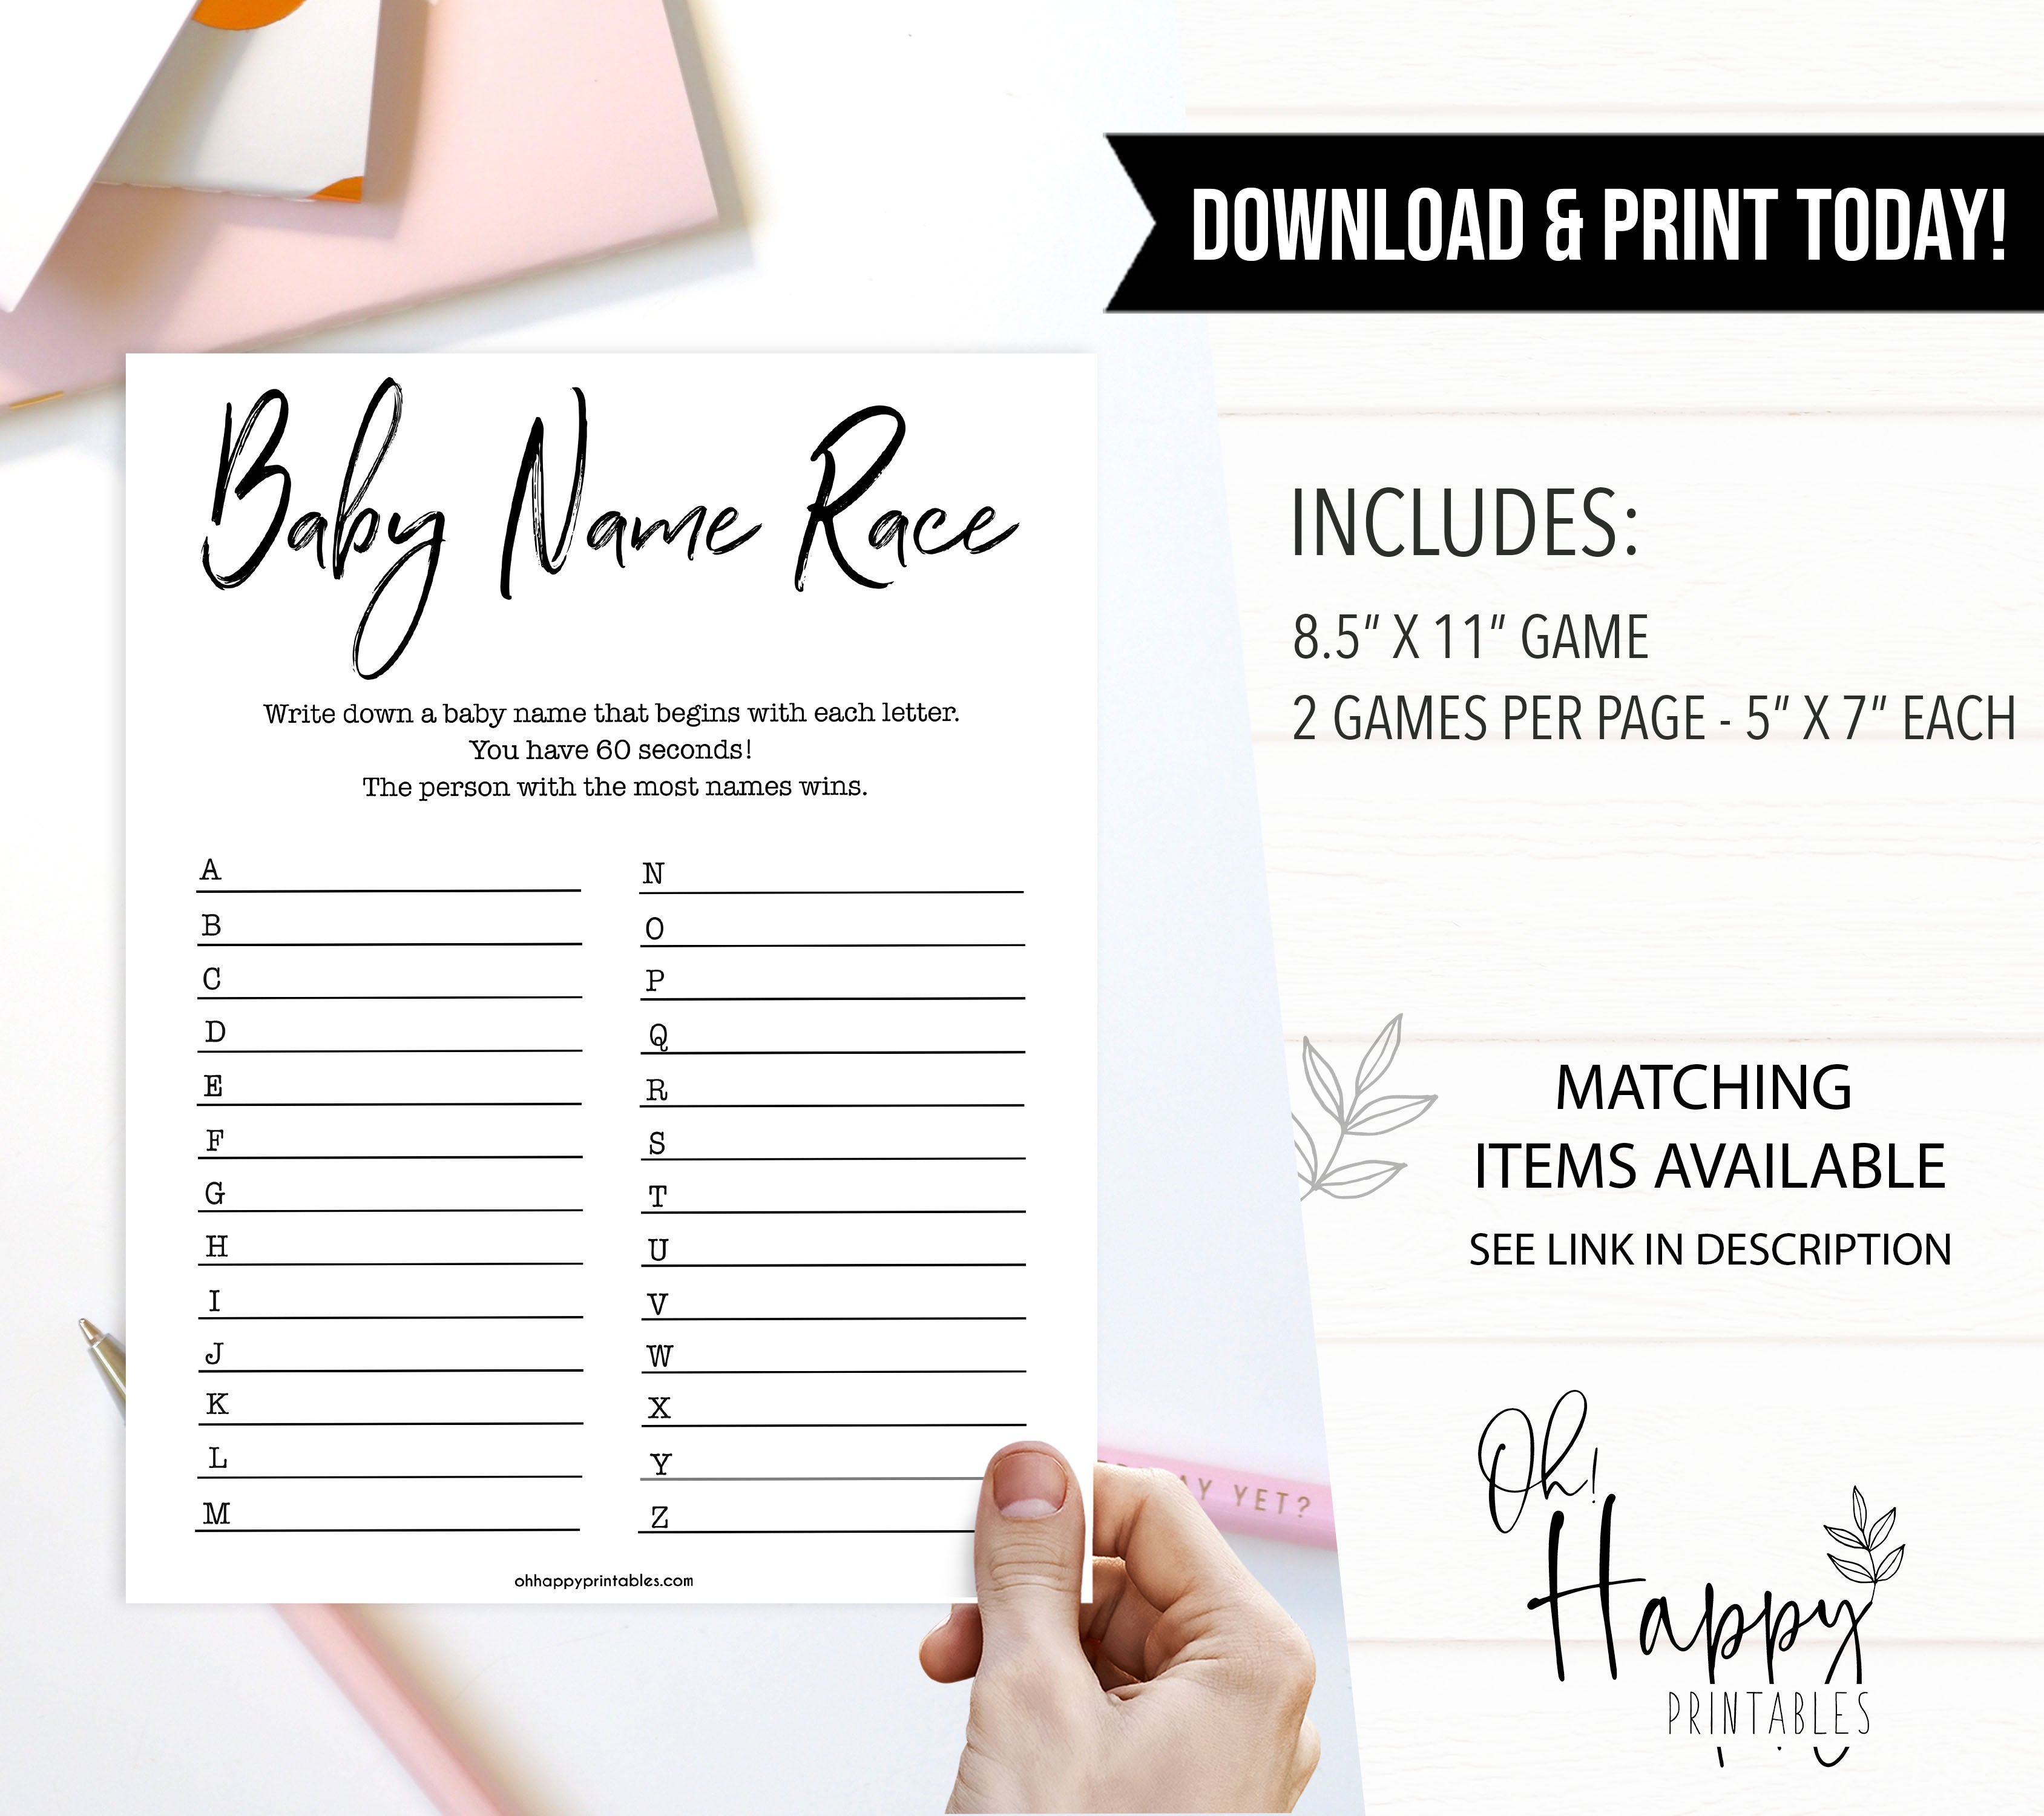 gender neutral baby shower games, baby name race, baby games, printable baby shower, popular baby games, fun baby games, baby shower games